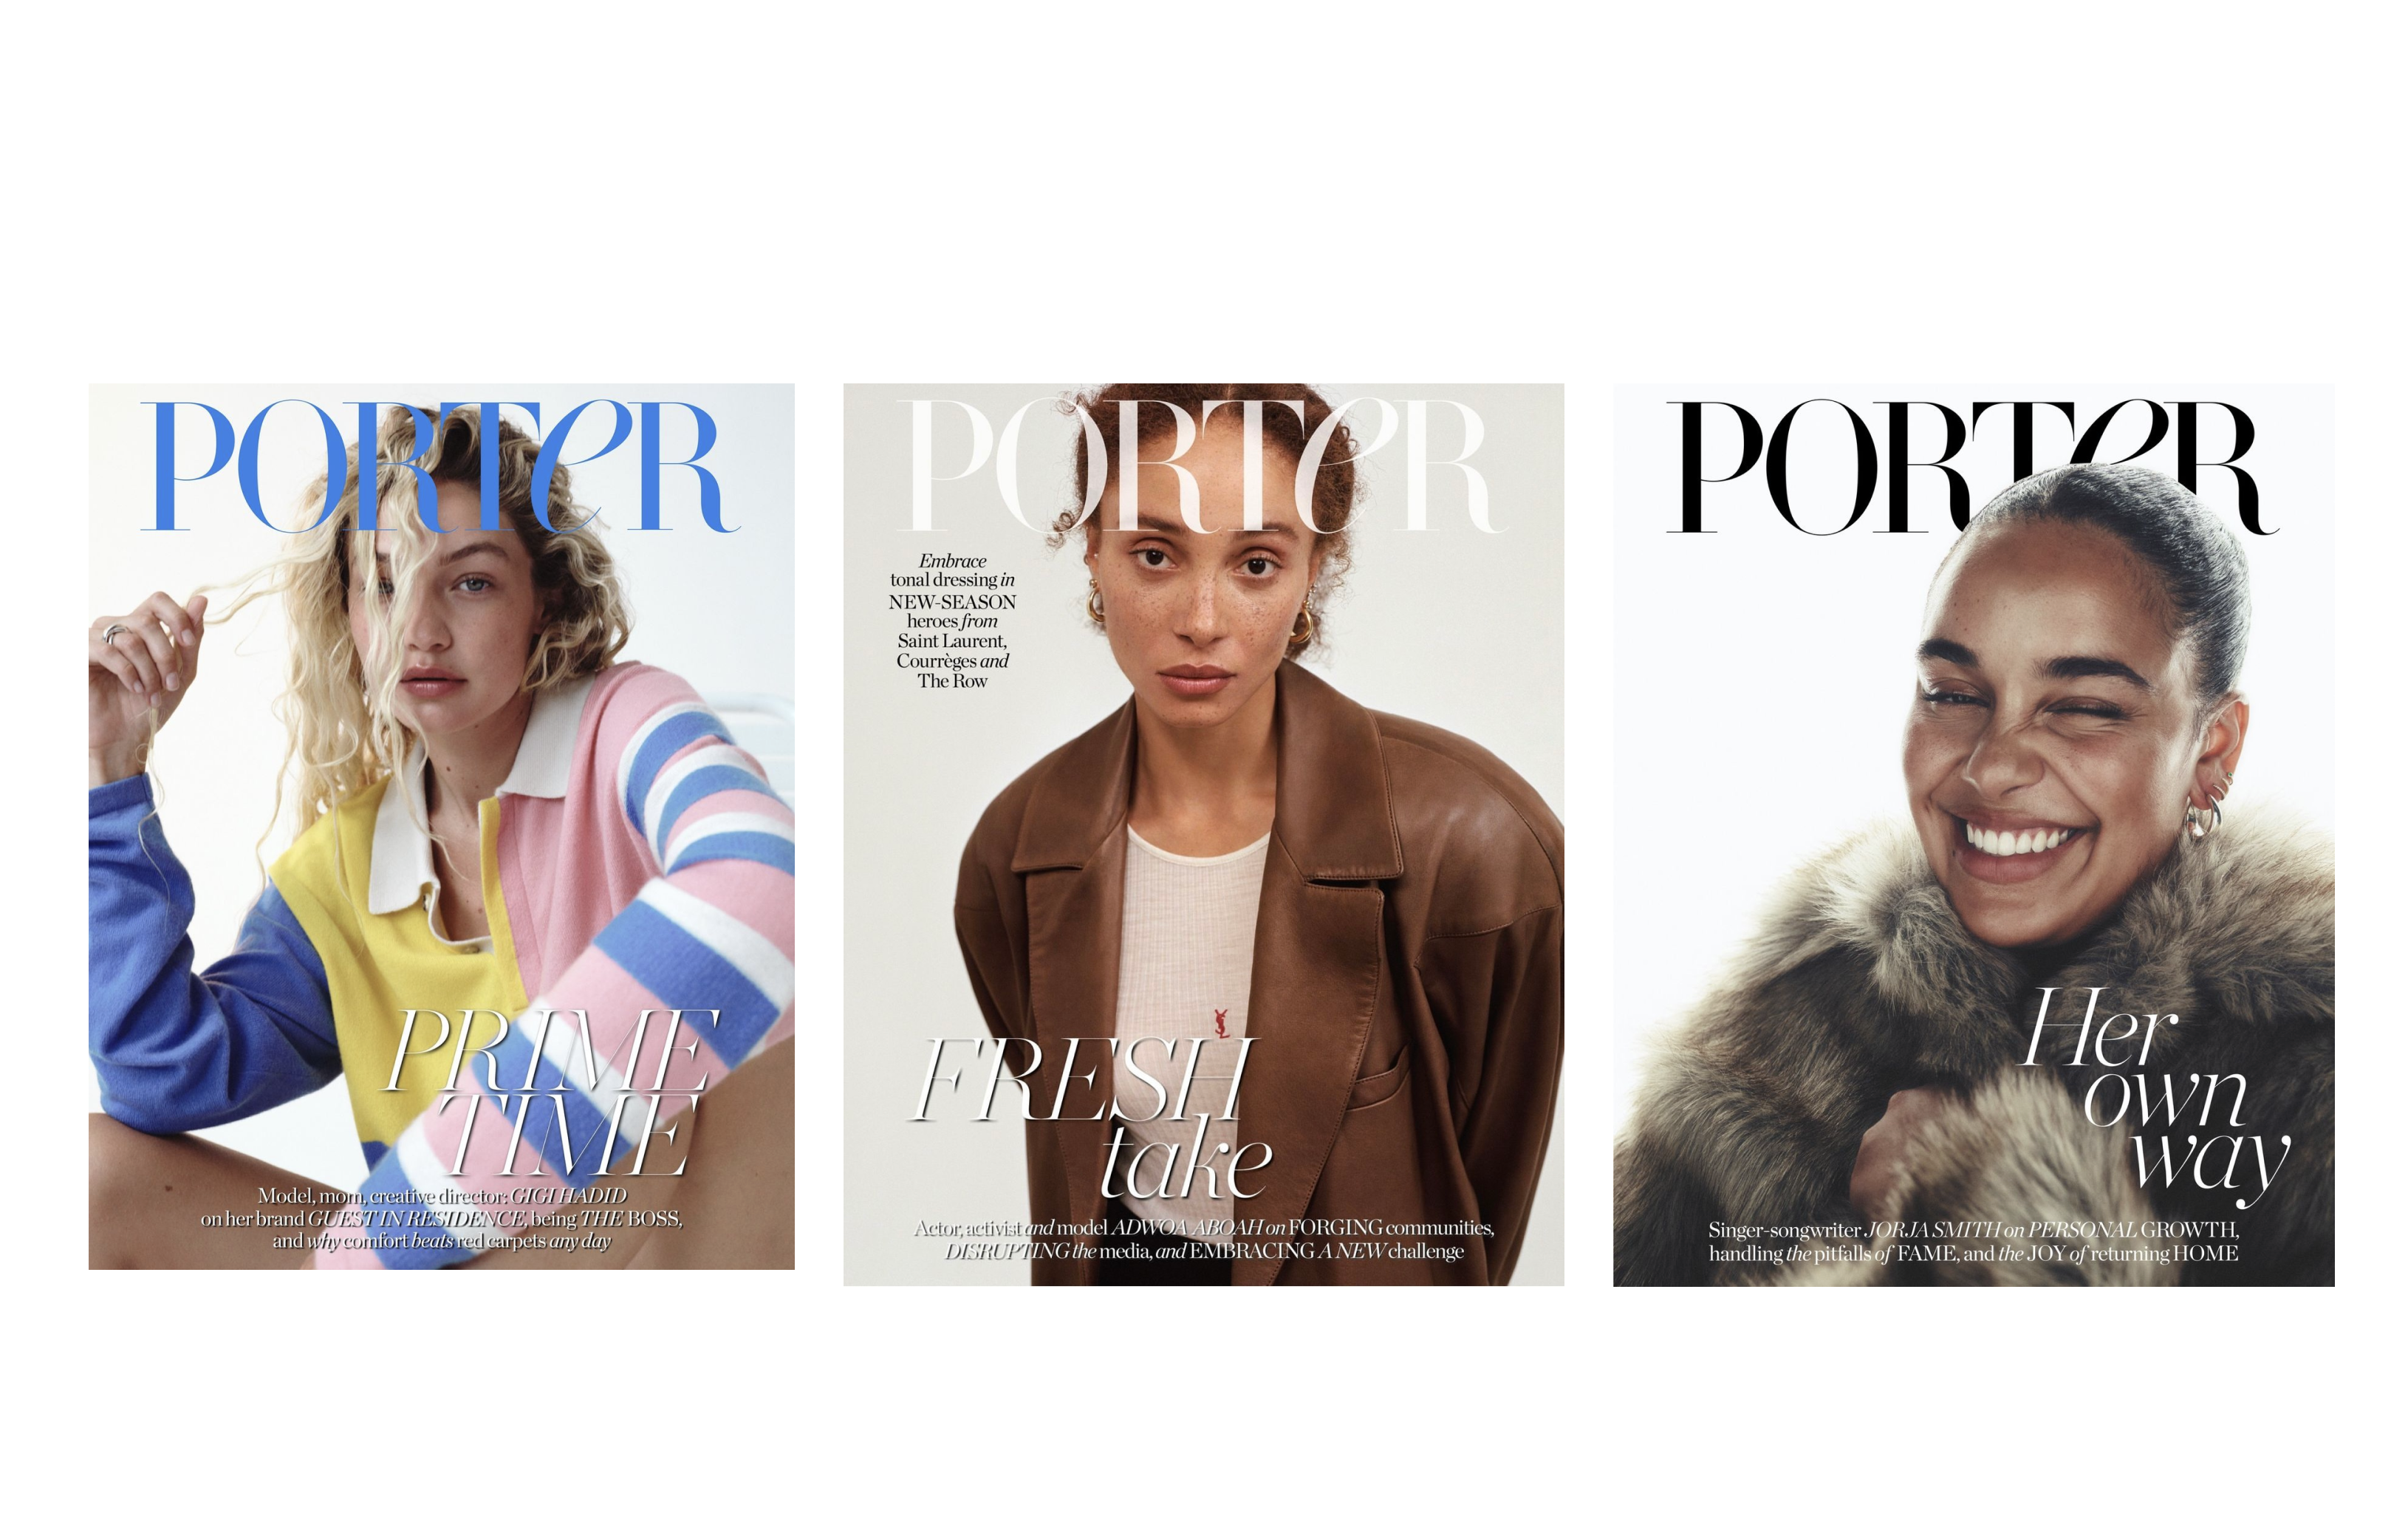 We still cannot quite believe the three times Porter Magazine features with muses and inspirations, Gigi Hadid, Adwoah Aboah and Jorja Smith. Such a pinch me moment for us!